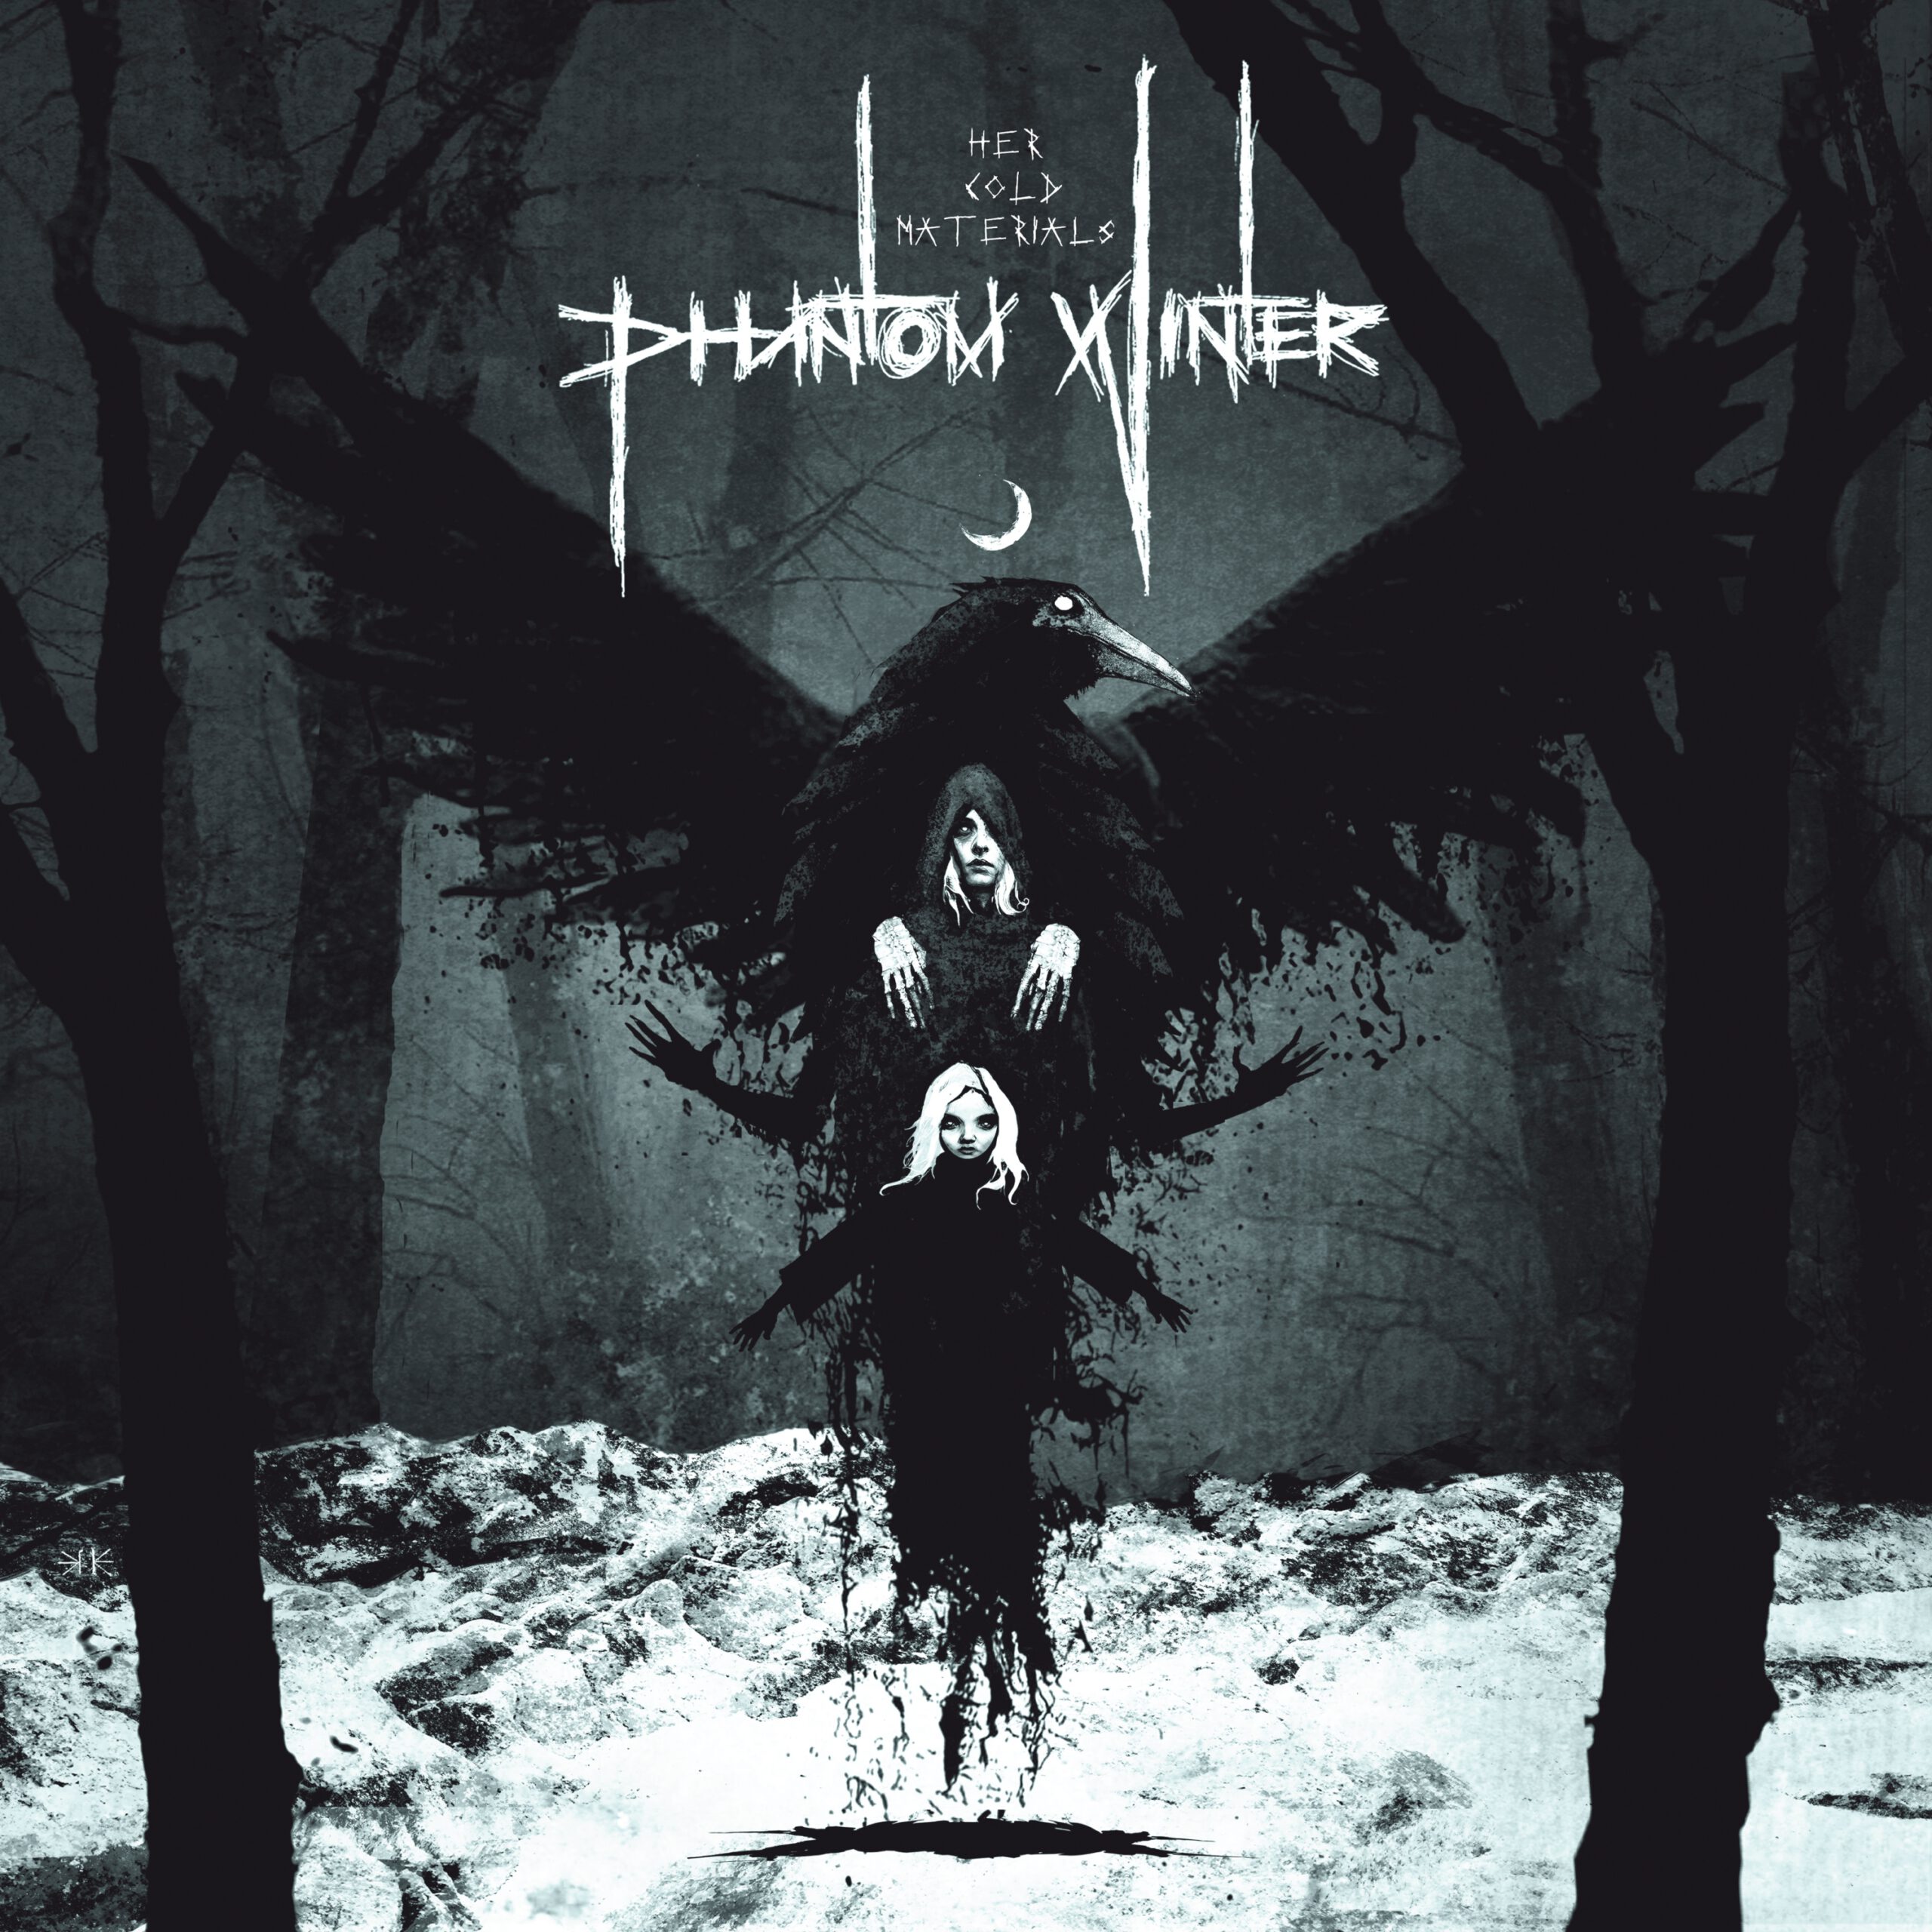 Phantom Winter – Her Cold Materials col.LP/CD Pressing Info: 100 peppermint green splatter LP Bundle with Pin & Patch (TCM mailorder only) (SOLD OUT) 100 peppermint green splatter LP (TCM mailorder only)(SOLD OUT) 500 frost clear splatter LP (SOLD OUT) 50 digipack CDs with Pin & Patch (TCM mailorder only) 350 CDs digipack   300 black wax LP